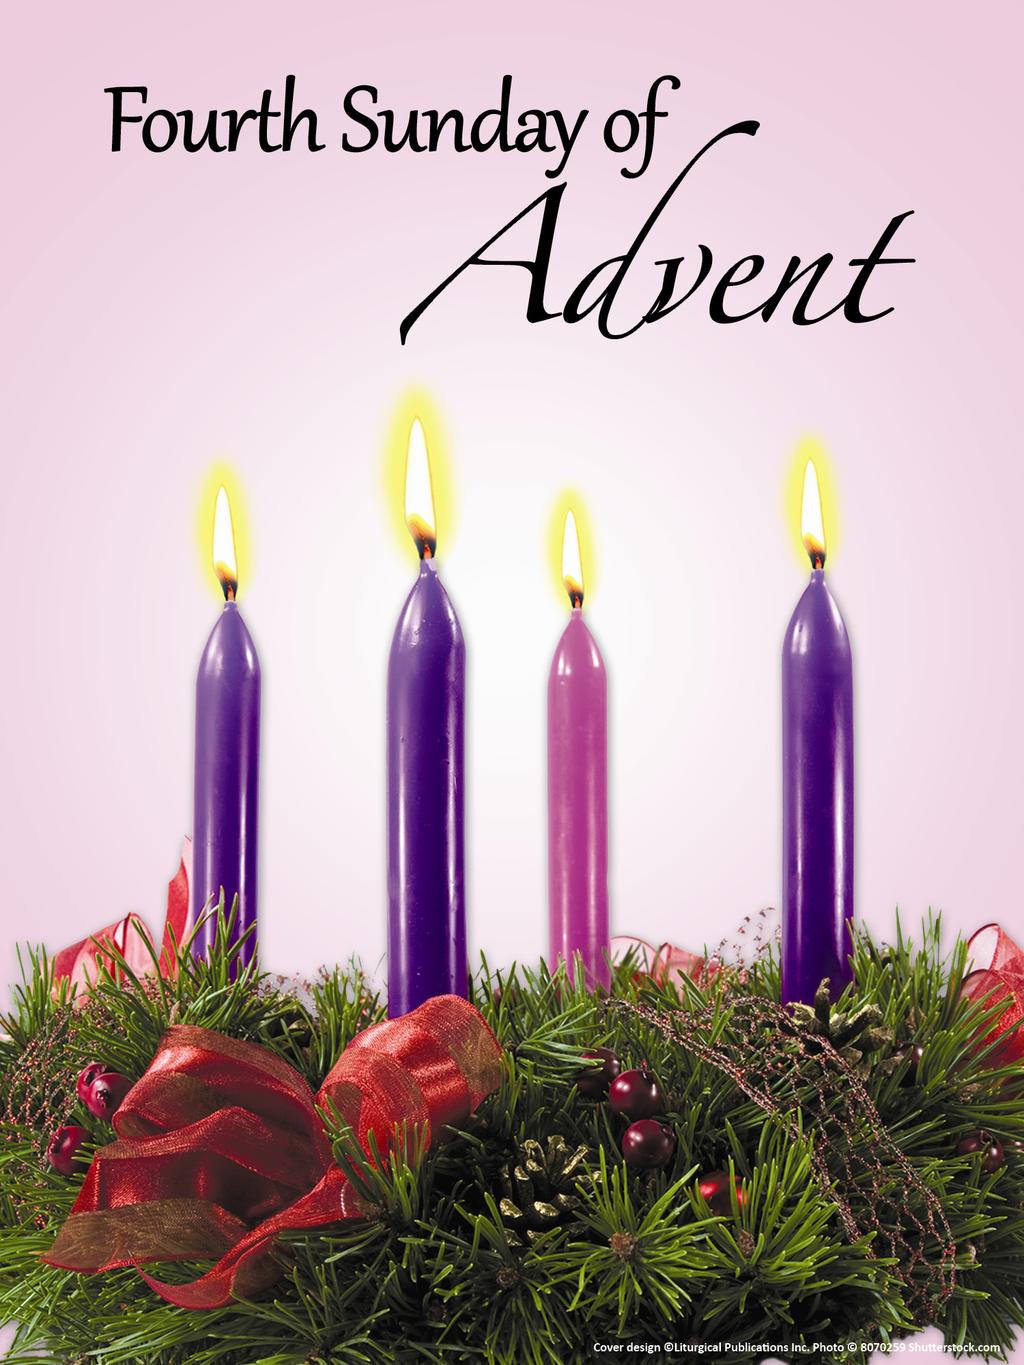 December 18, 2011 - Fourth Sunday of Advent page 2 St. Francis of Assisi Parish Teutopolis, Illinois Teutopolis, Illinois Parish Office 203 E. Main St., P.O. Box 730, Teutopolis, IL 62467-0730 Office Hours: Mon.